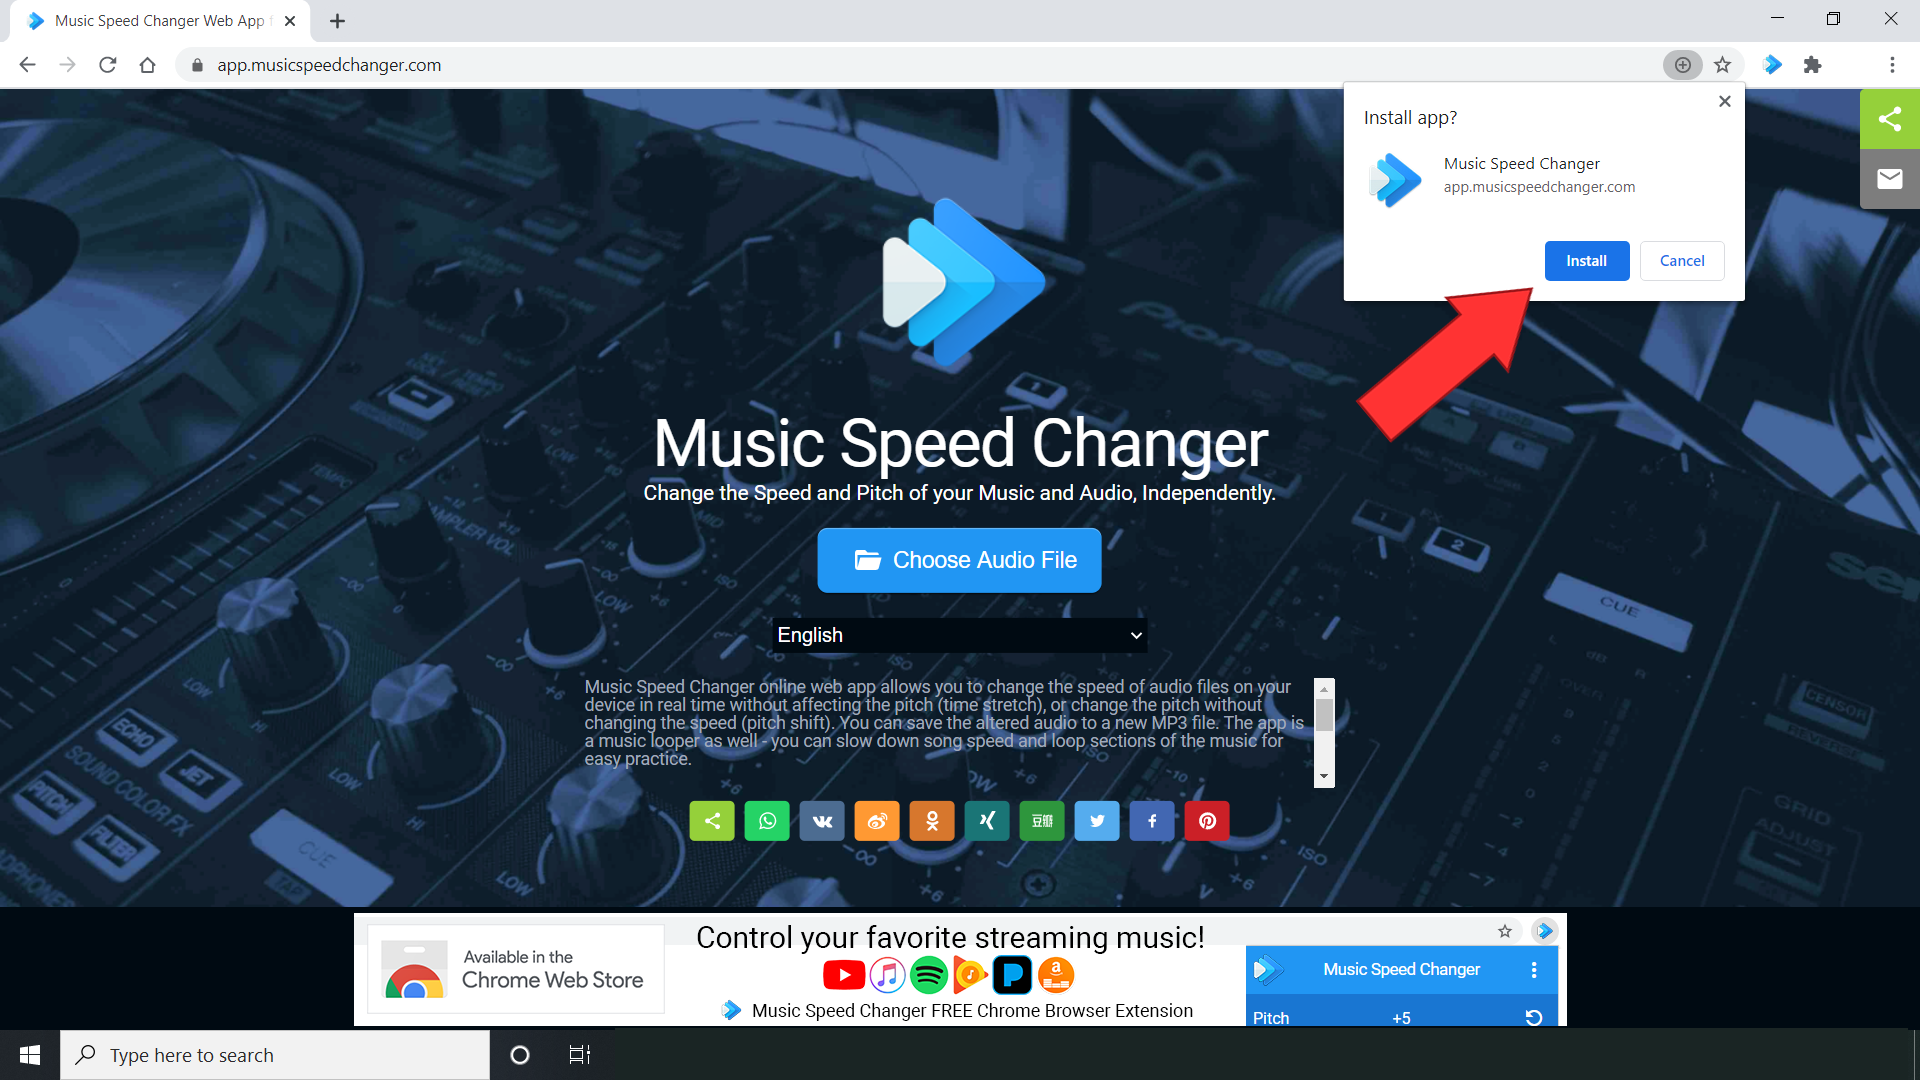 Finish Music Speed Changer PC install